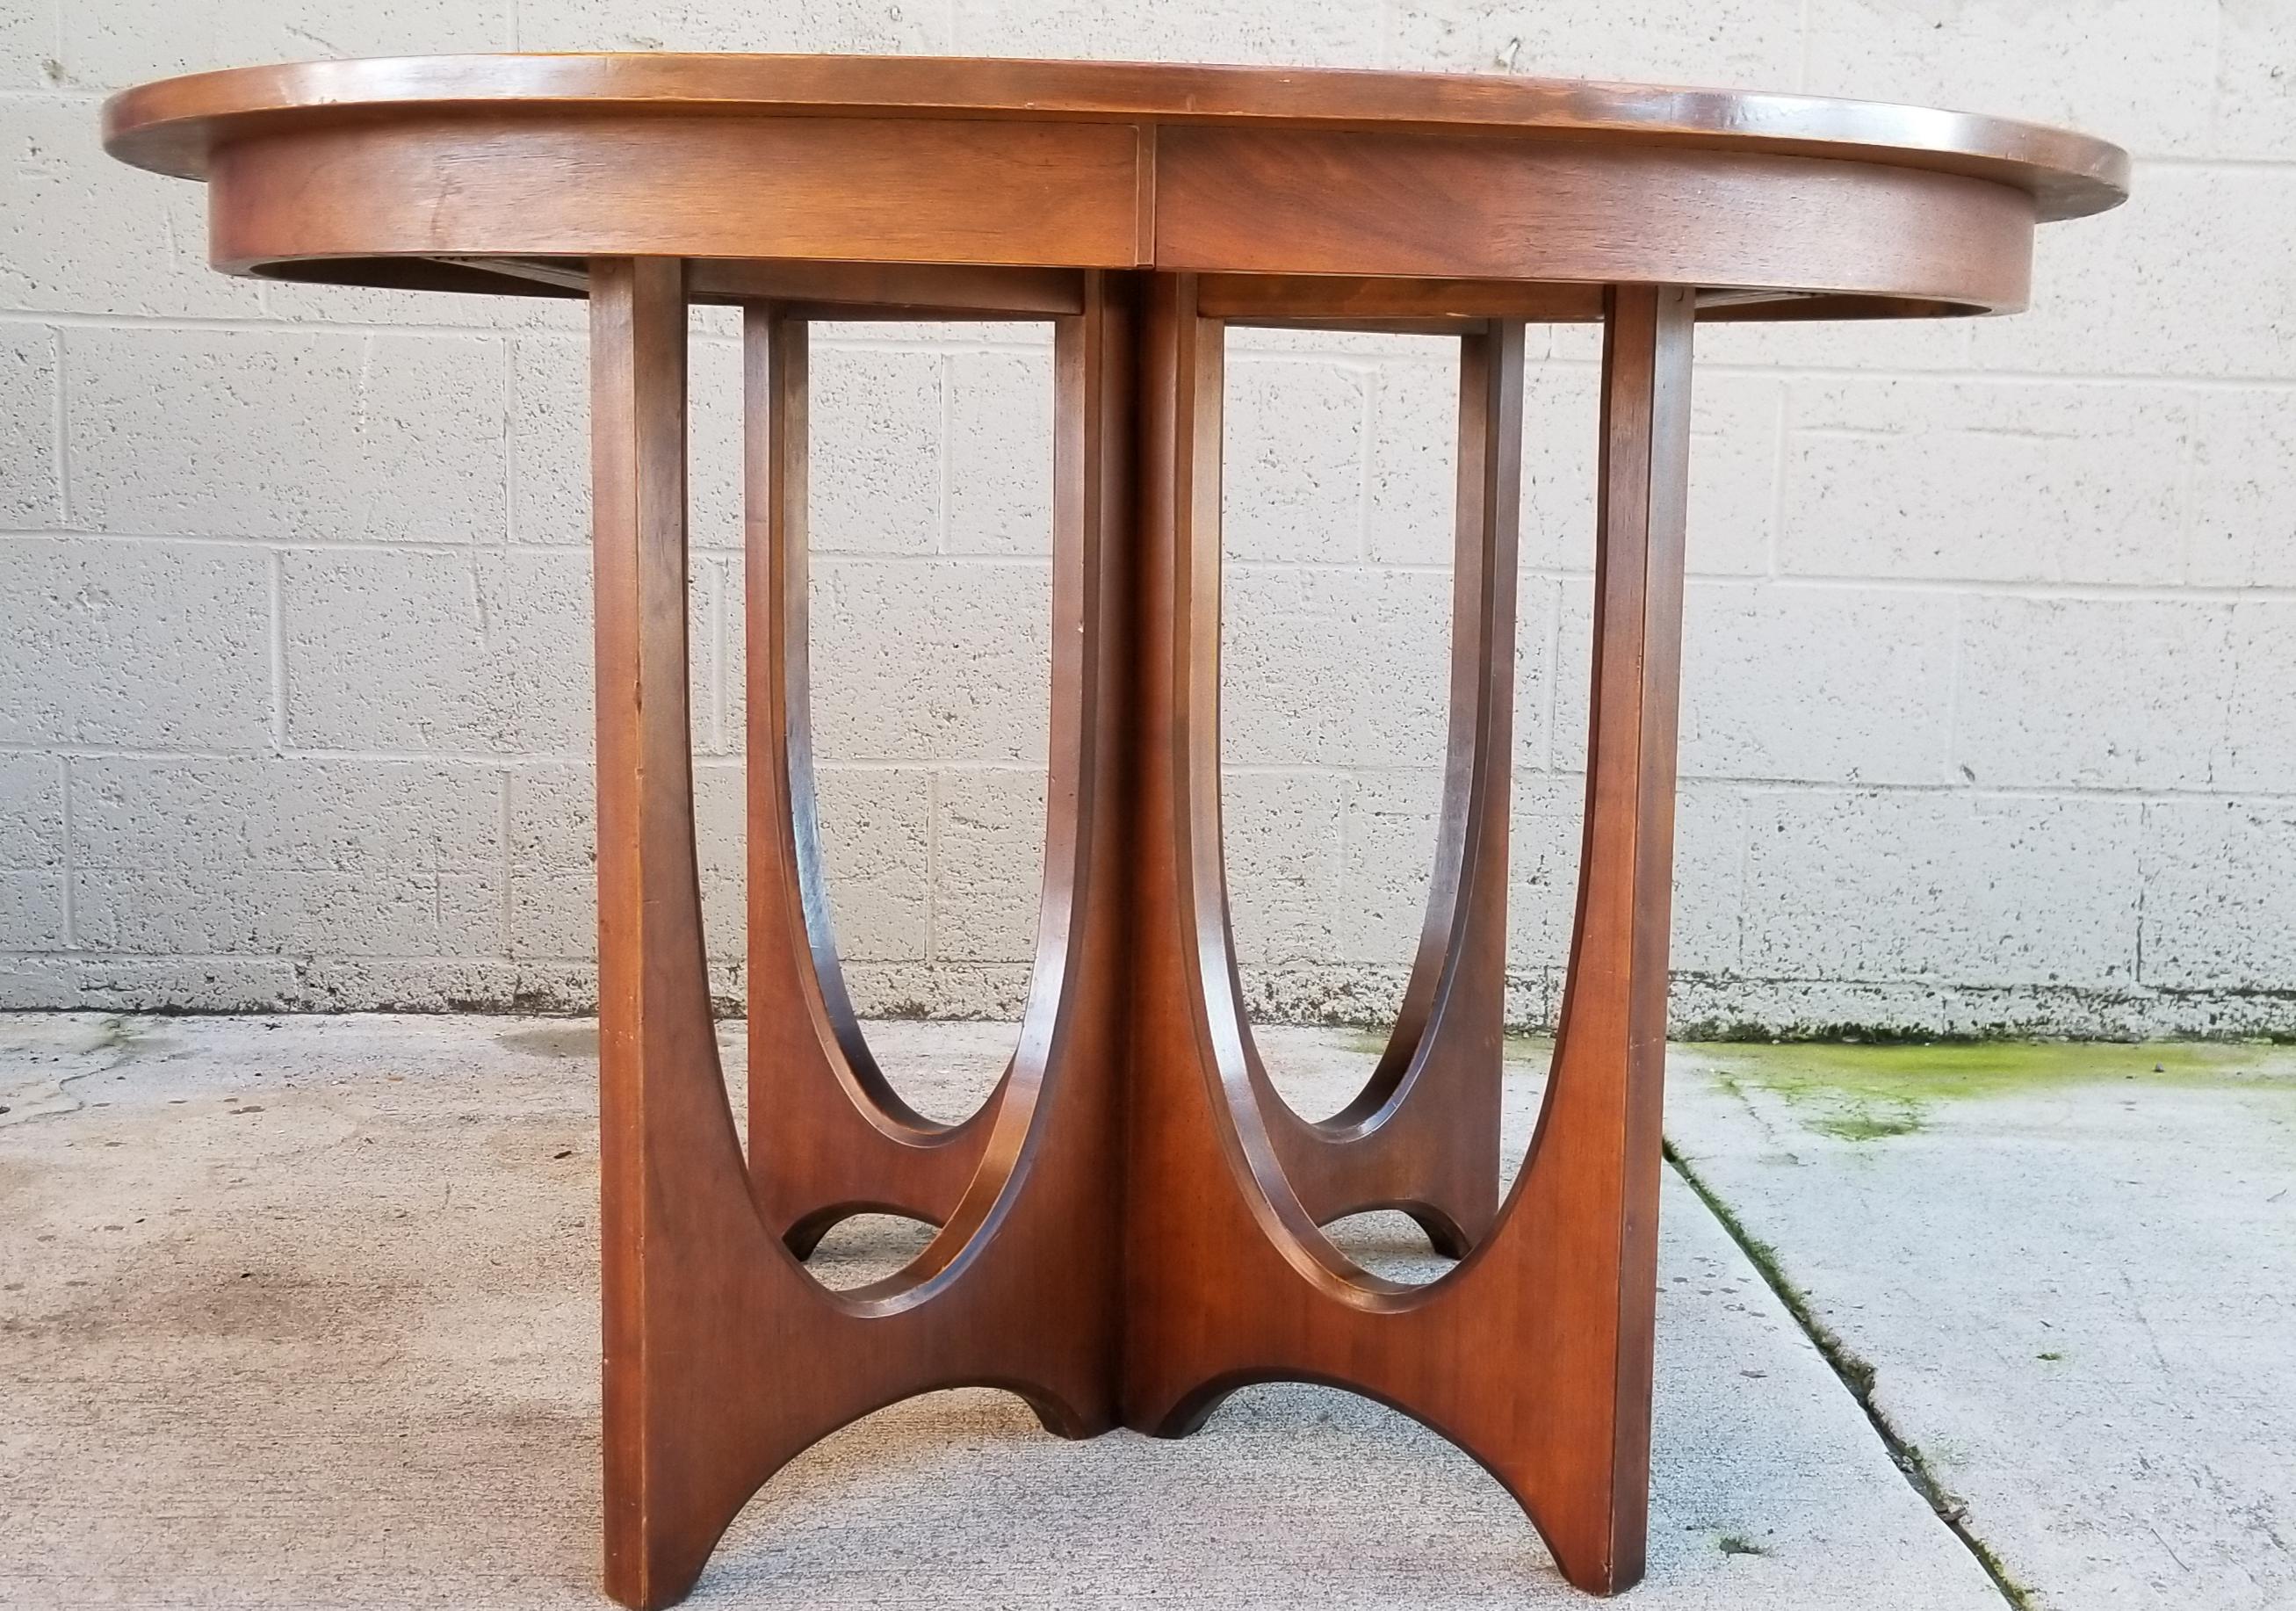 A Mid-Century Modern sculptural dining table by Broyhill Furniture. One of their most sought after lines 